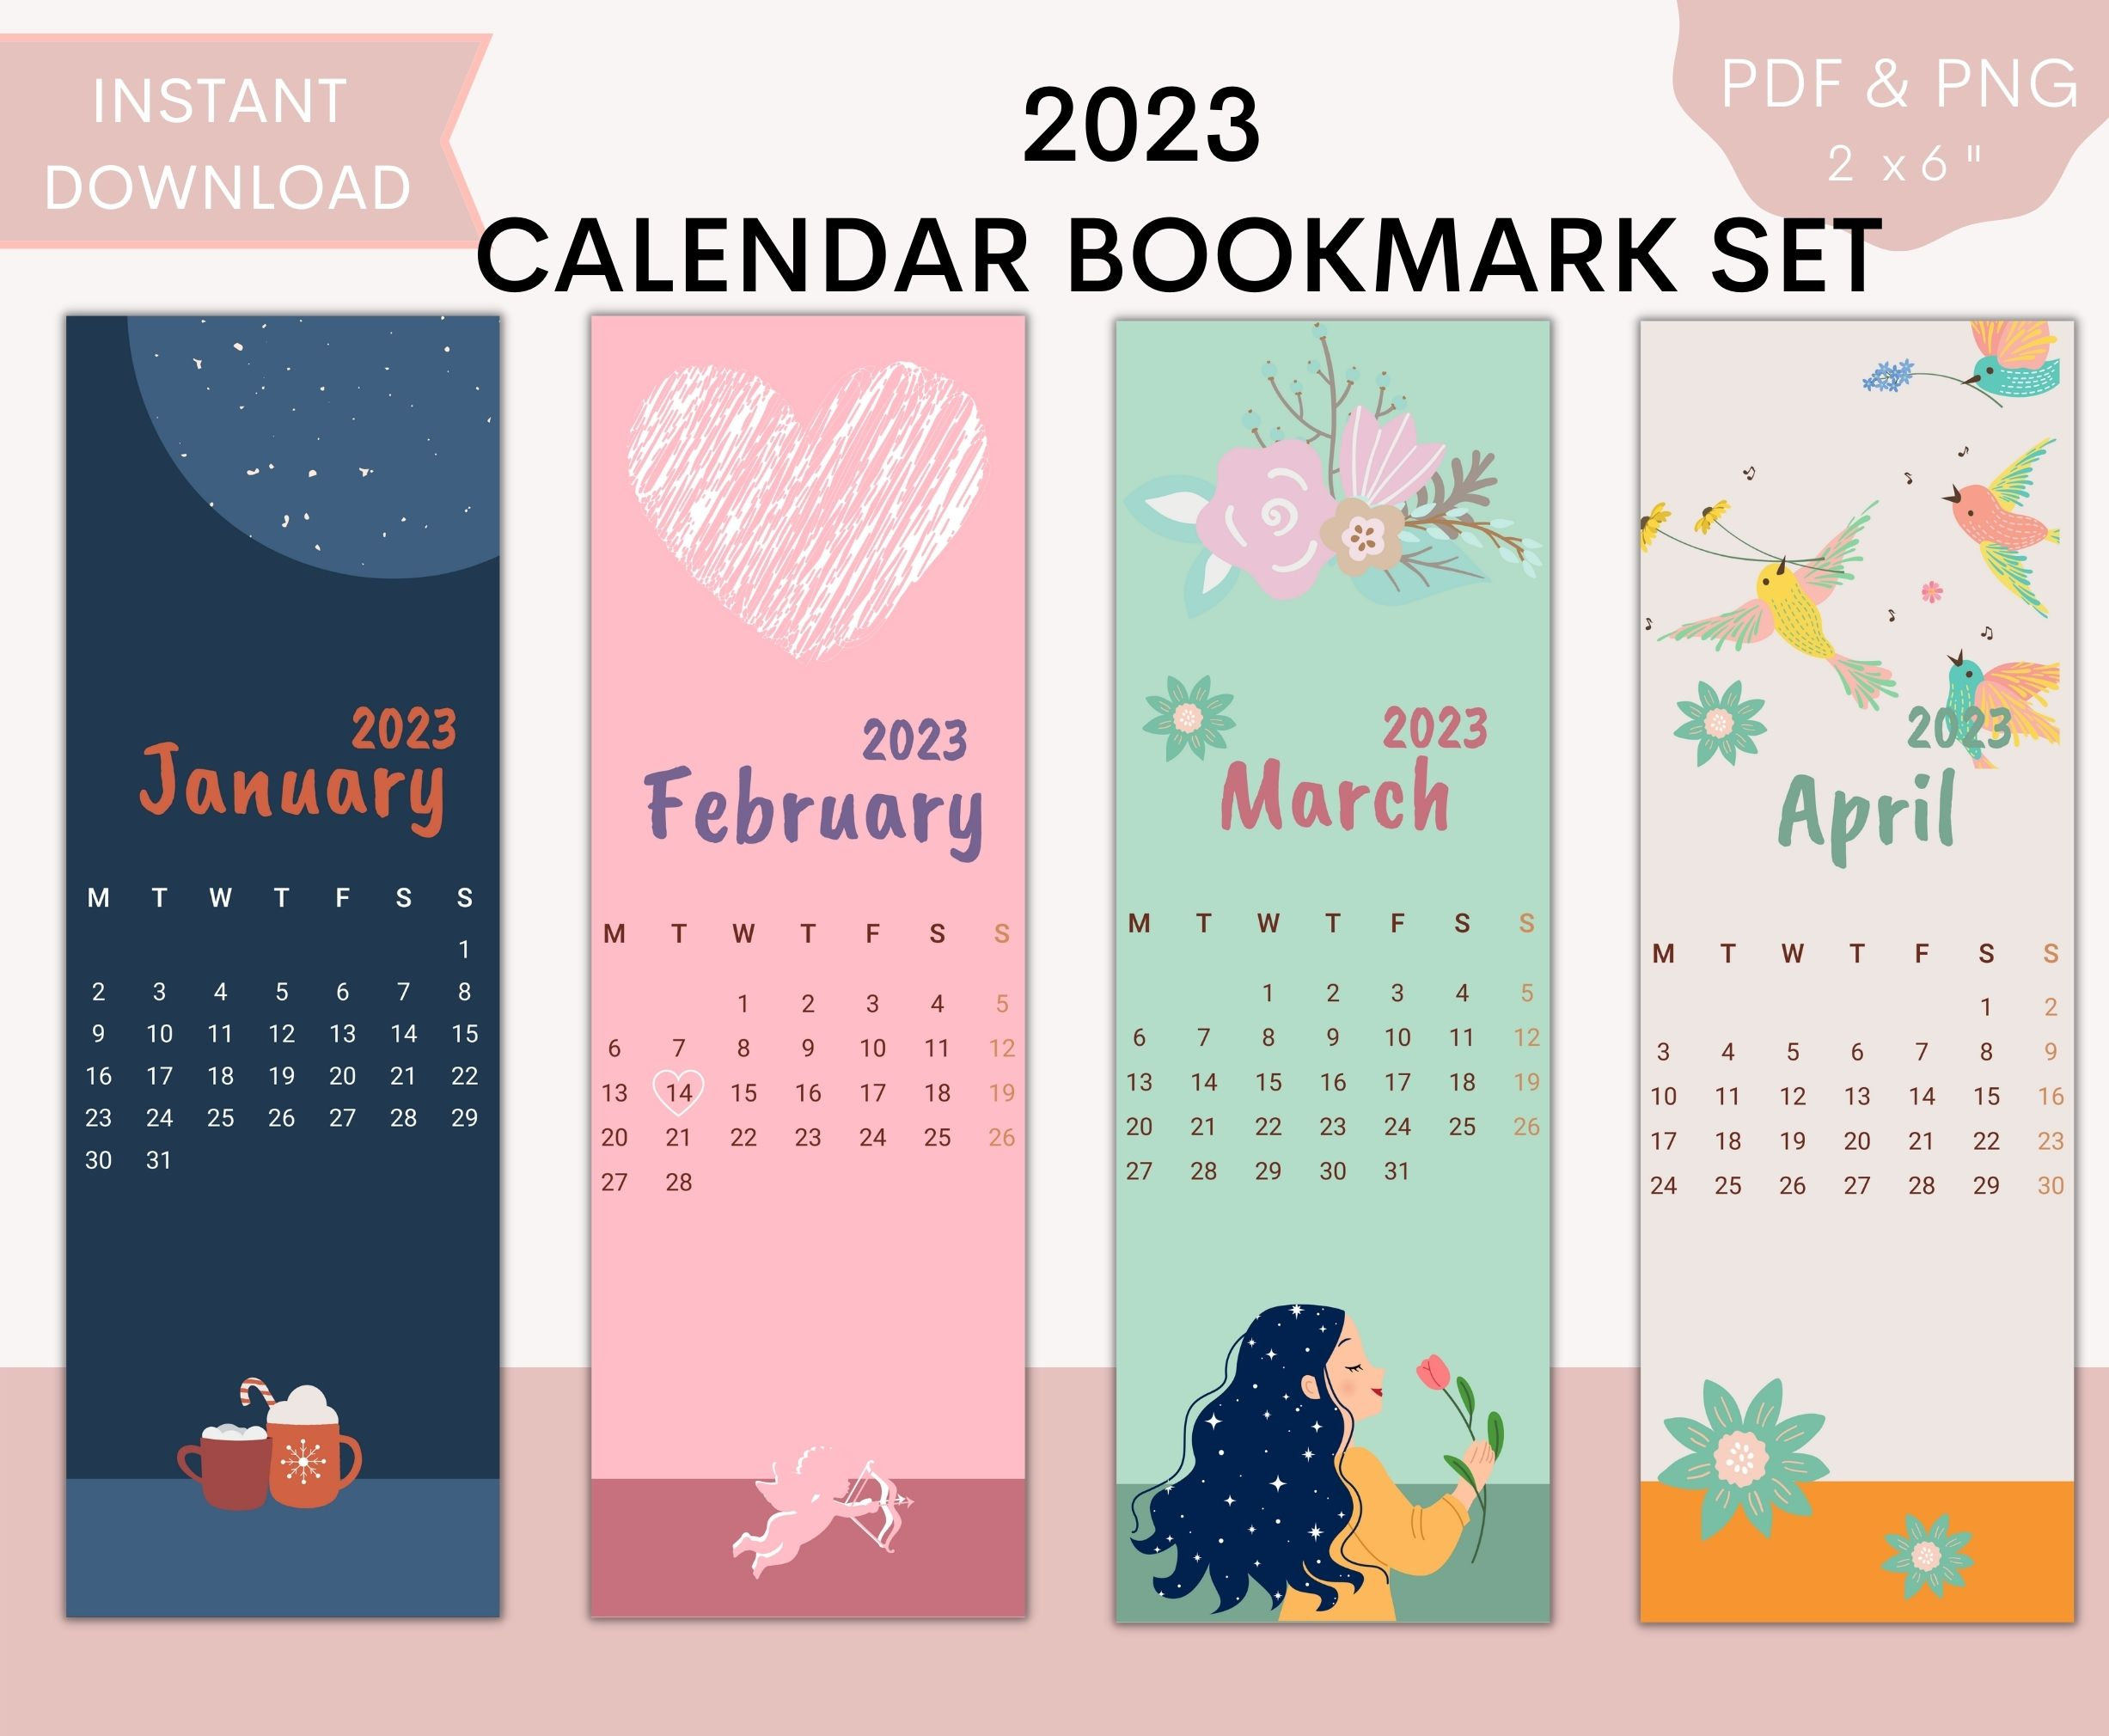 Bookmark 2023 Gift Guide by BOOKMARKREADS - Issuu